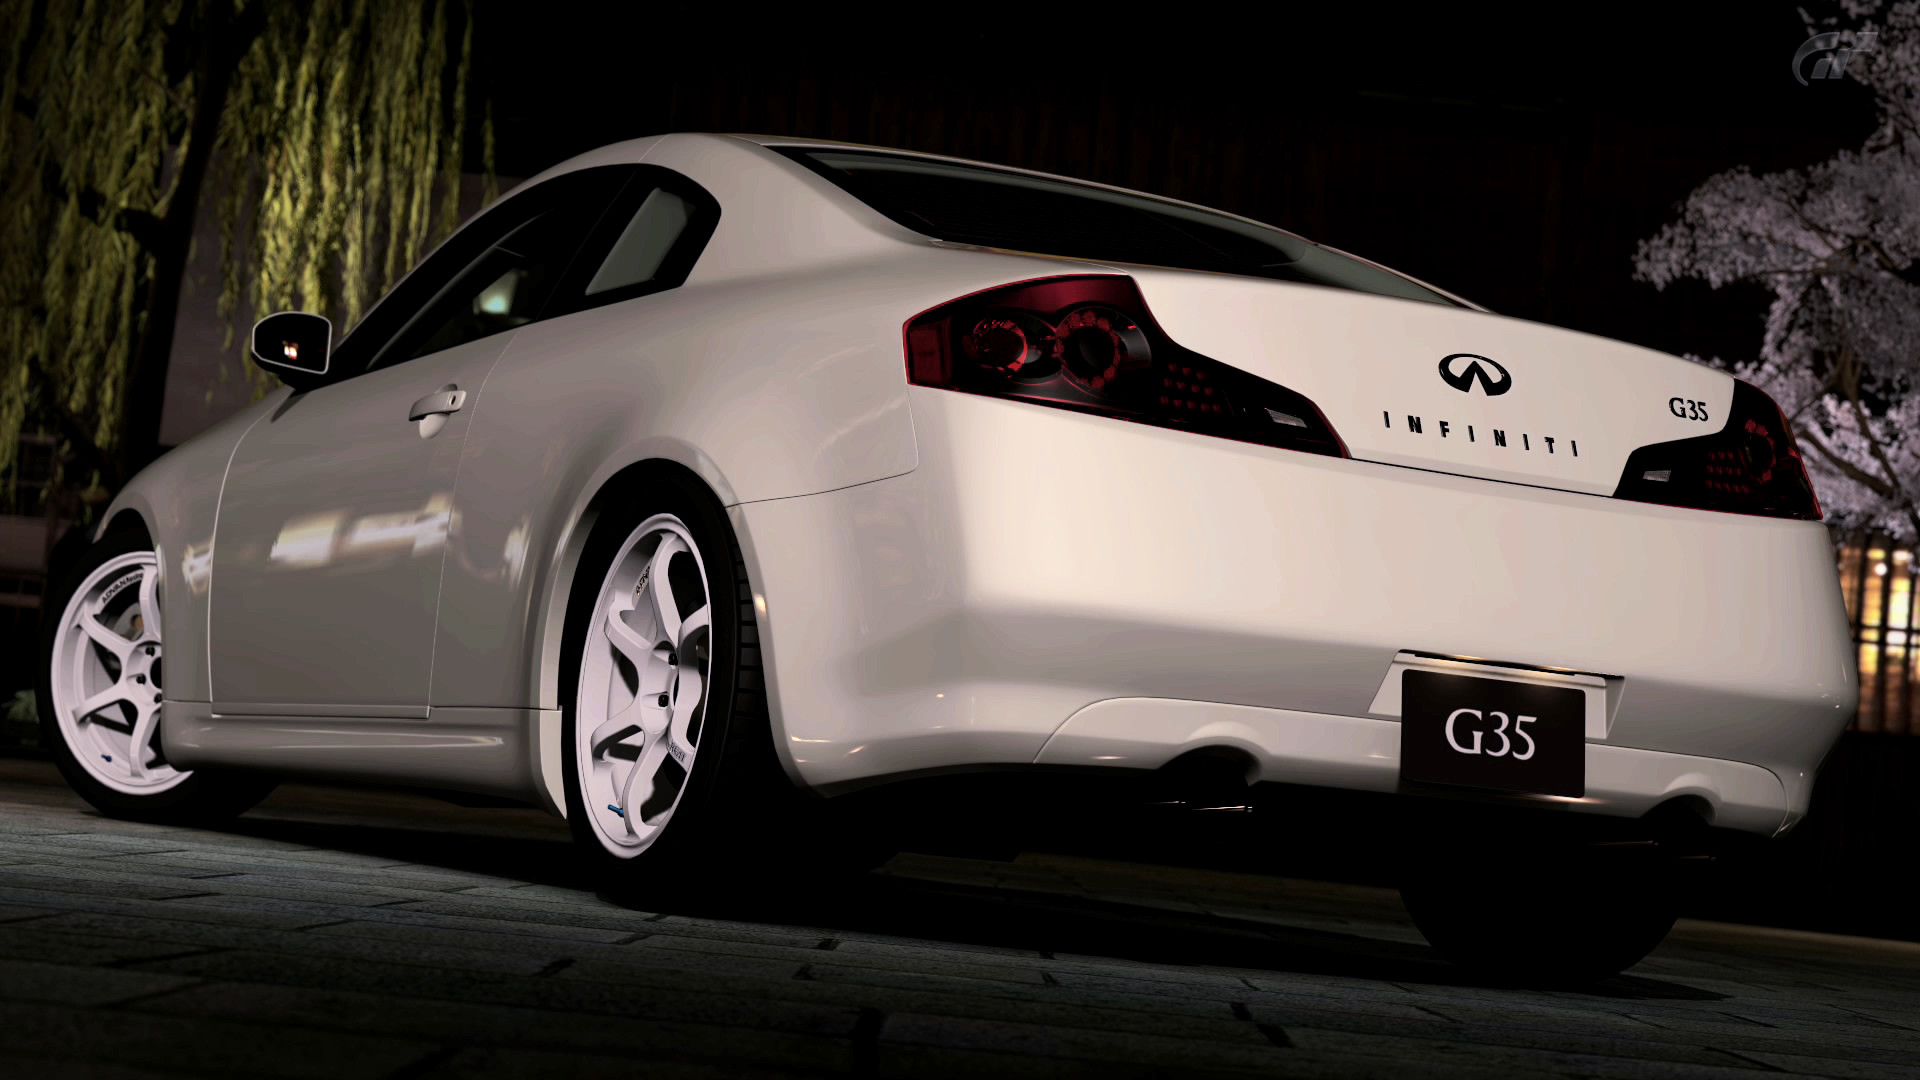 Infiniti G35 Coupe Wallpaper 51 Images